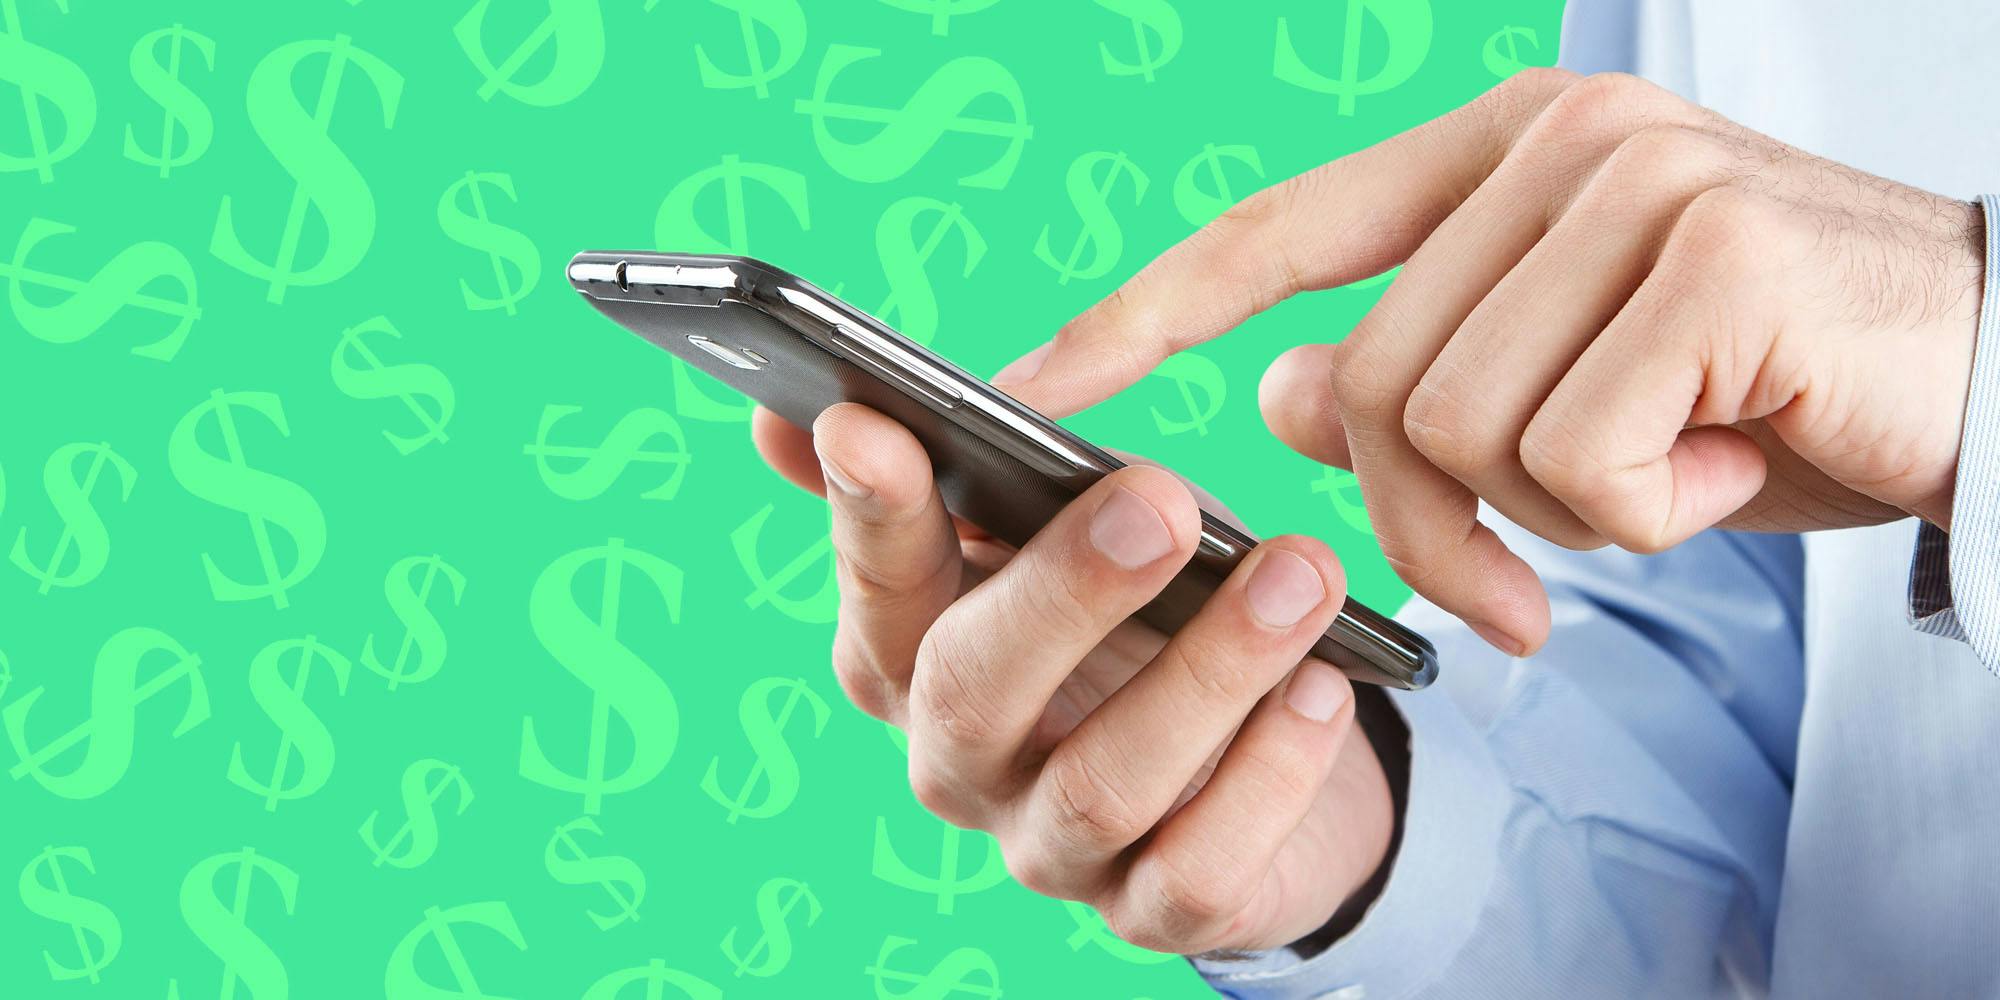 Man holding phone in front of money symbol green background